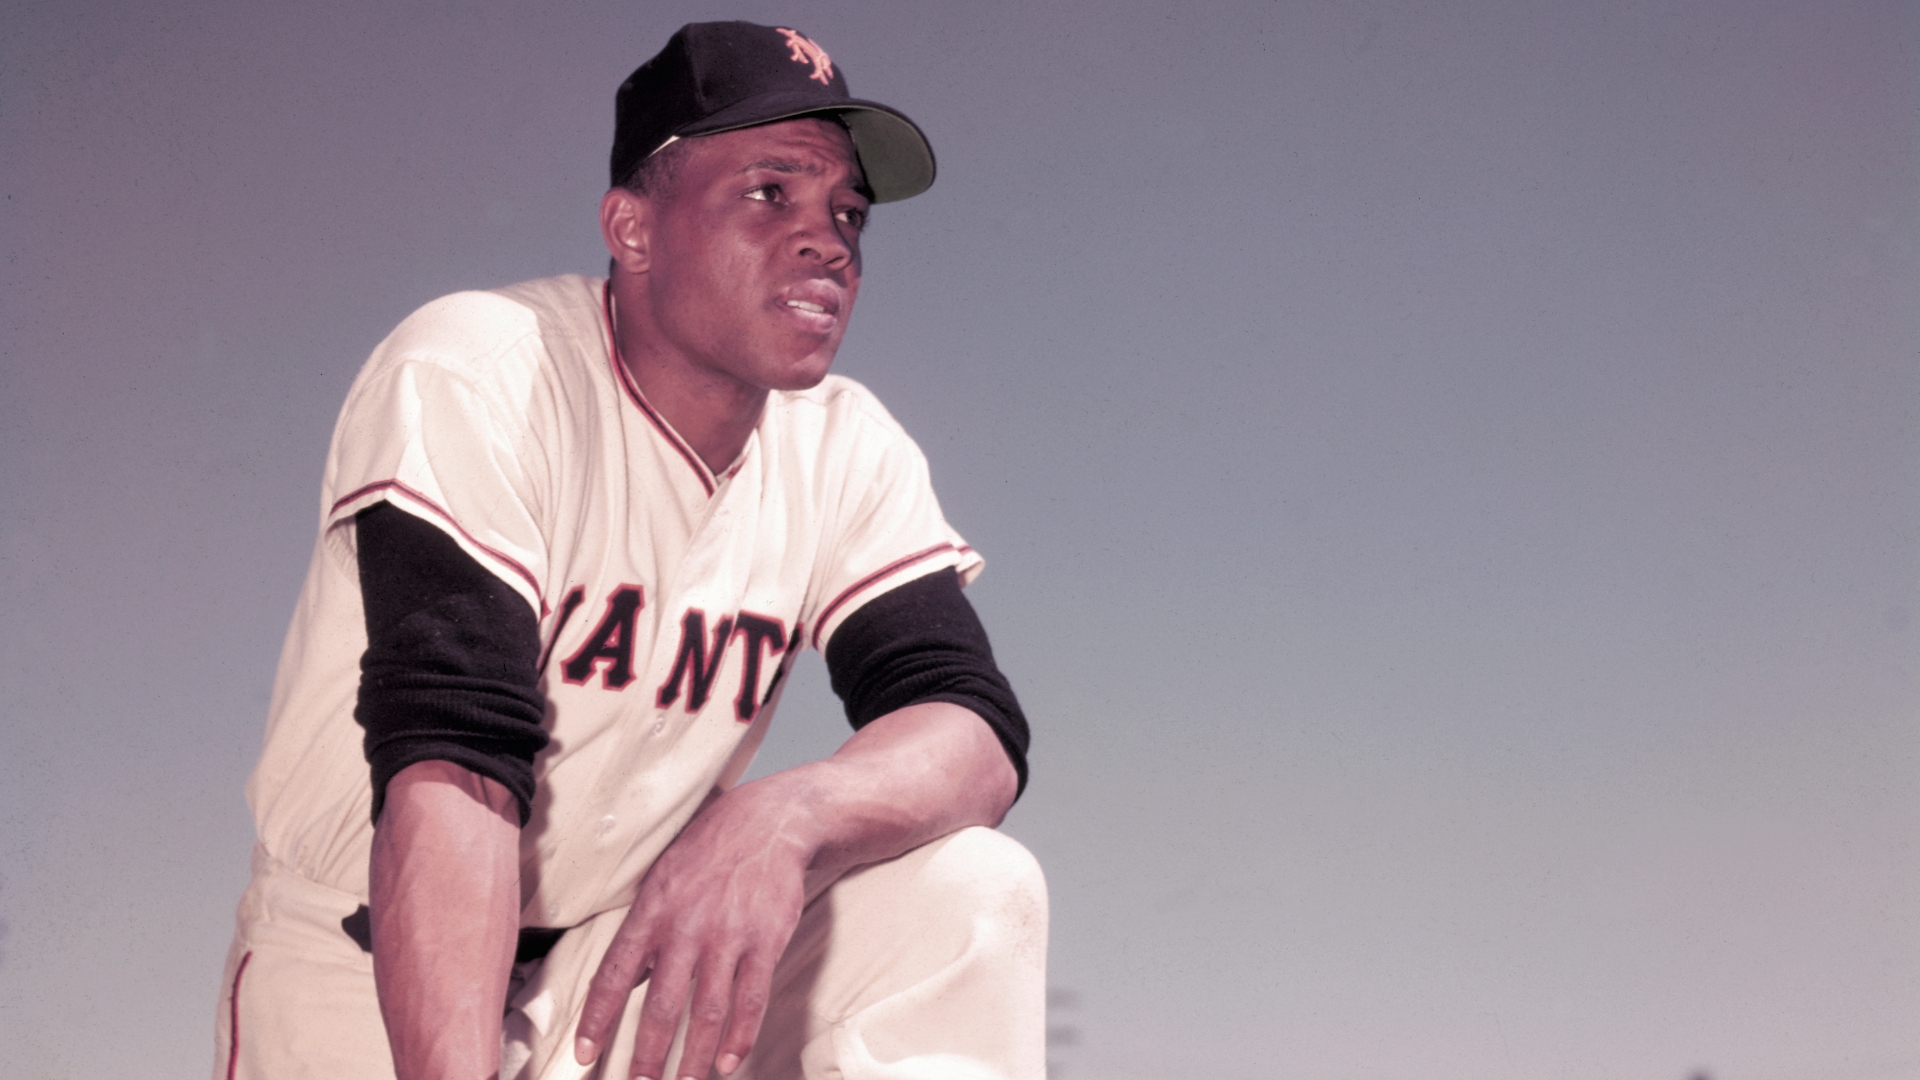 Remembering the life and legacy of Willie Mays